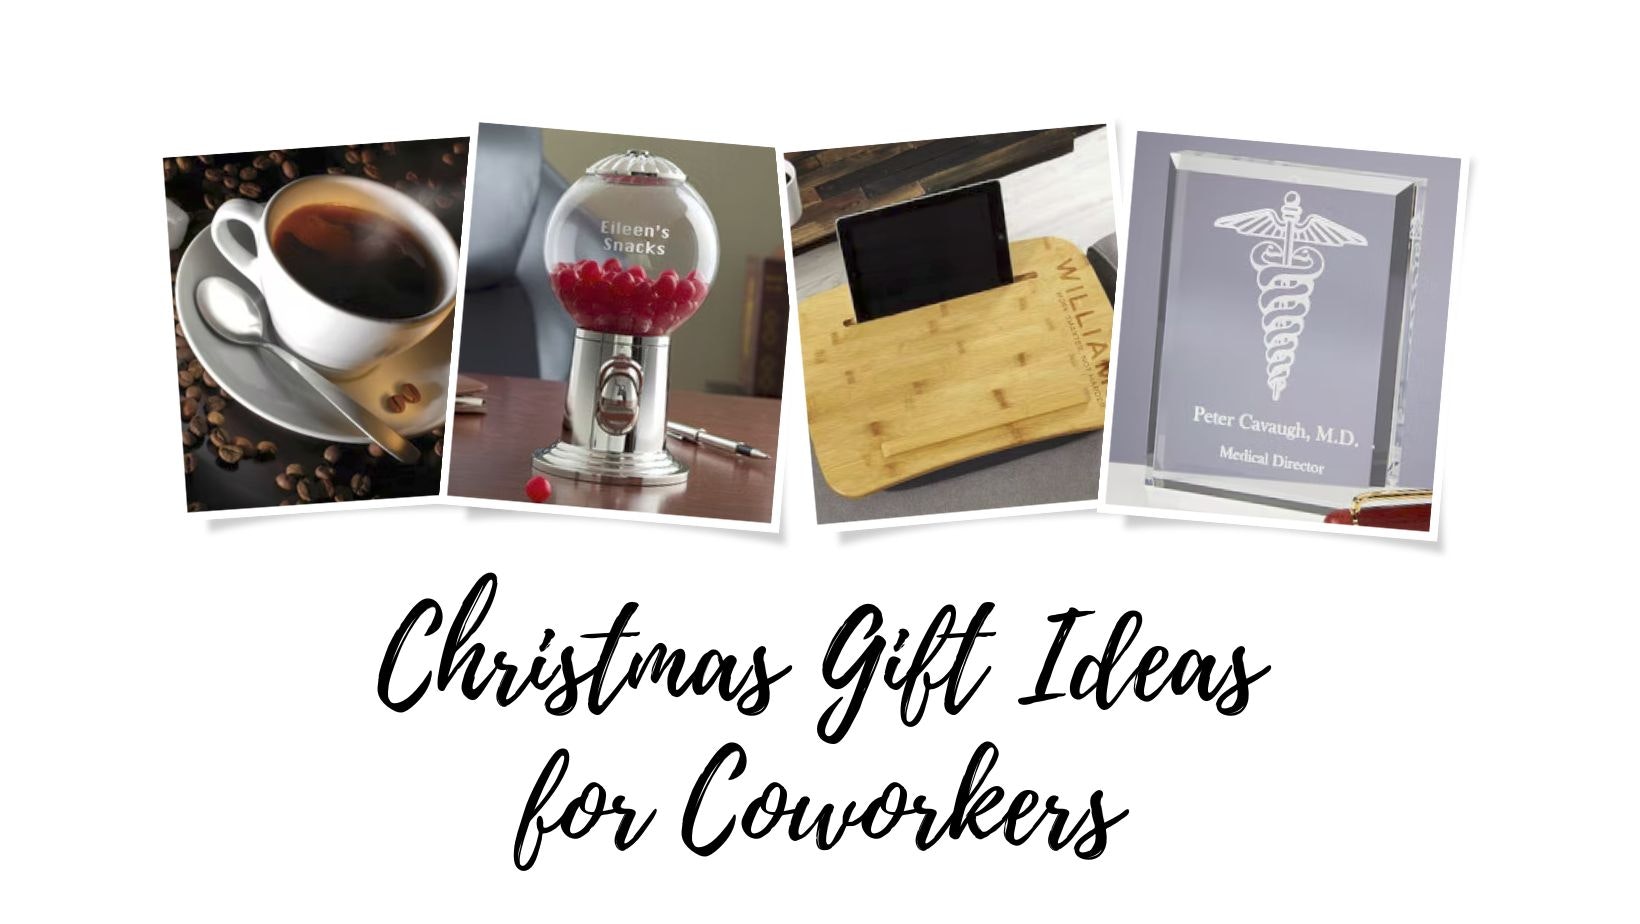 https://giftadvisor.imgix.net/christmas-gift-ideas-for-coworkers.jpg?fit=crop&max-w=600&max-h=315